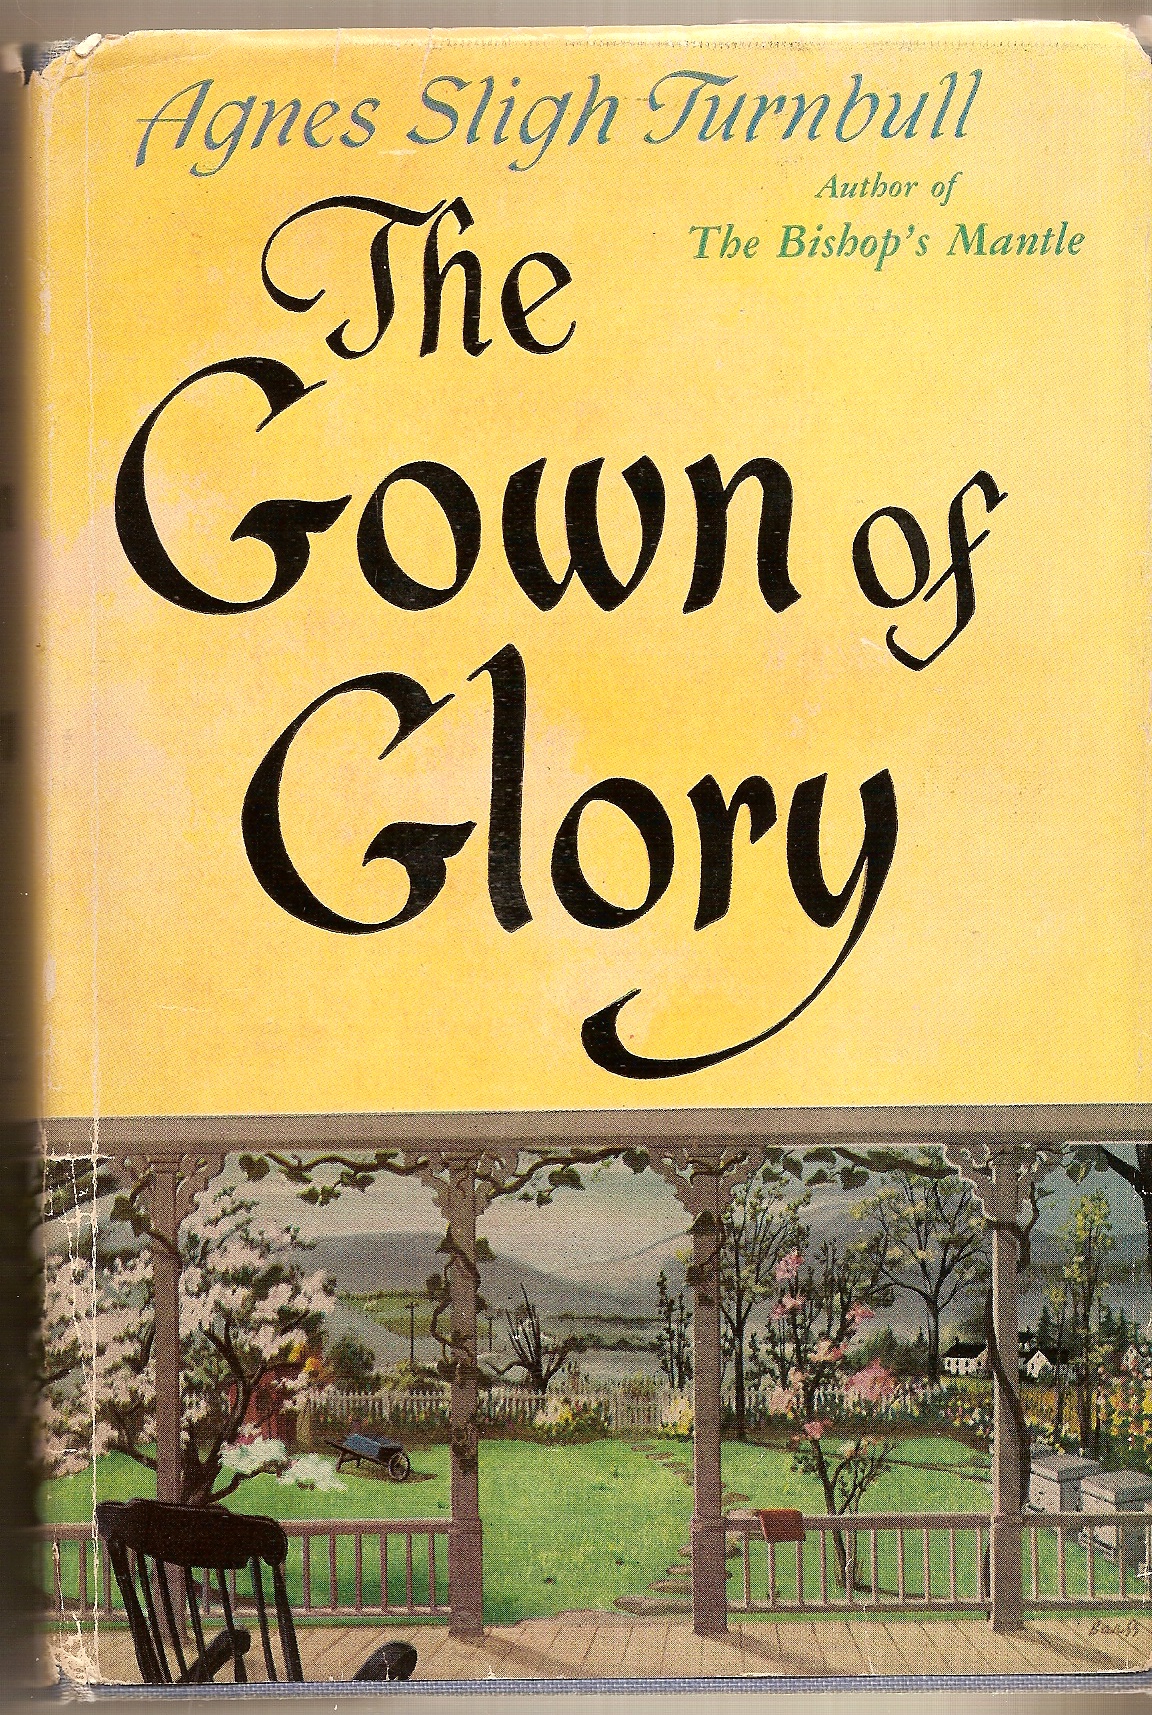 TURNBULL AGNES SLIGH - Gown of Glory, the